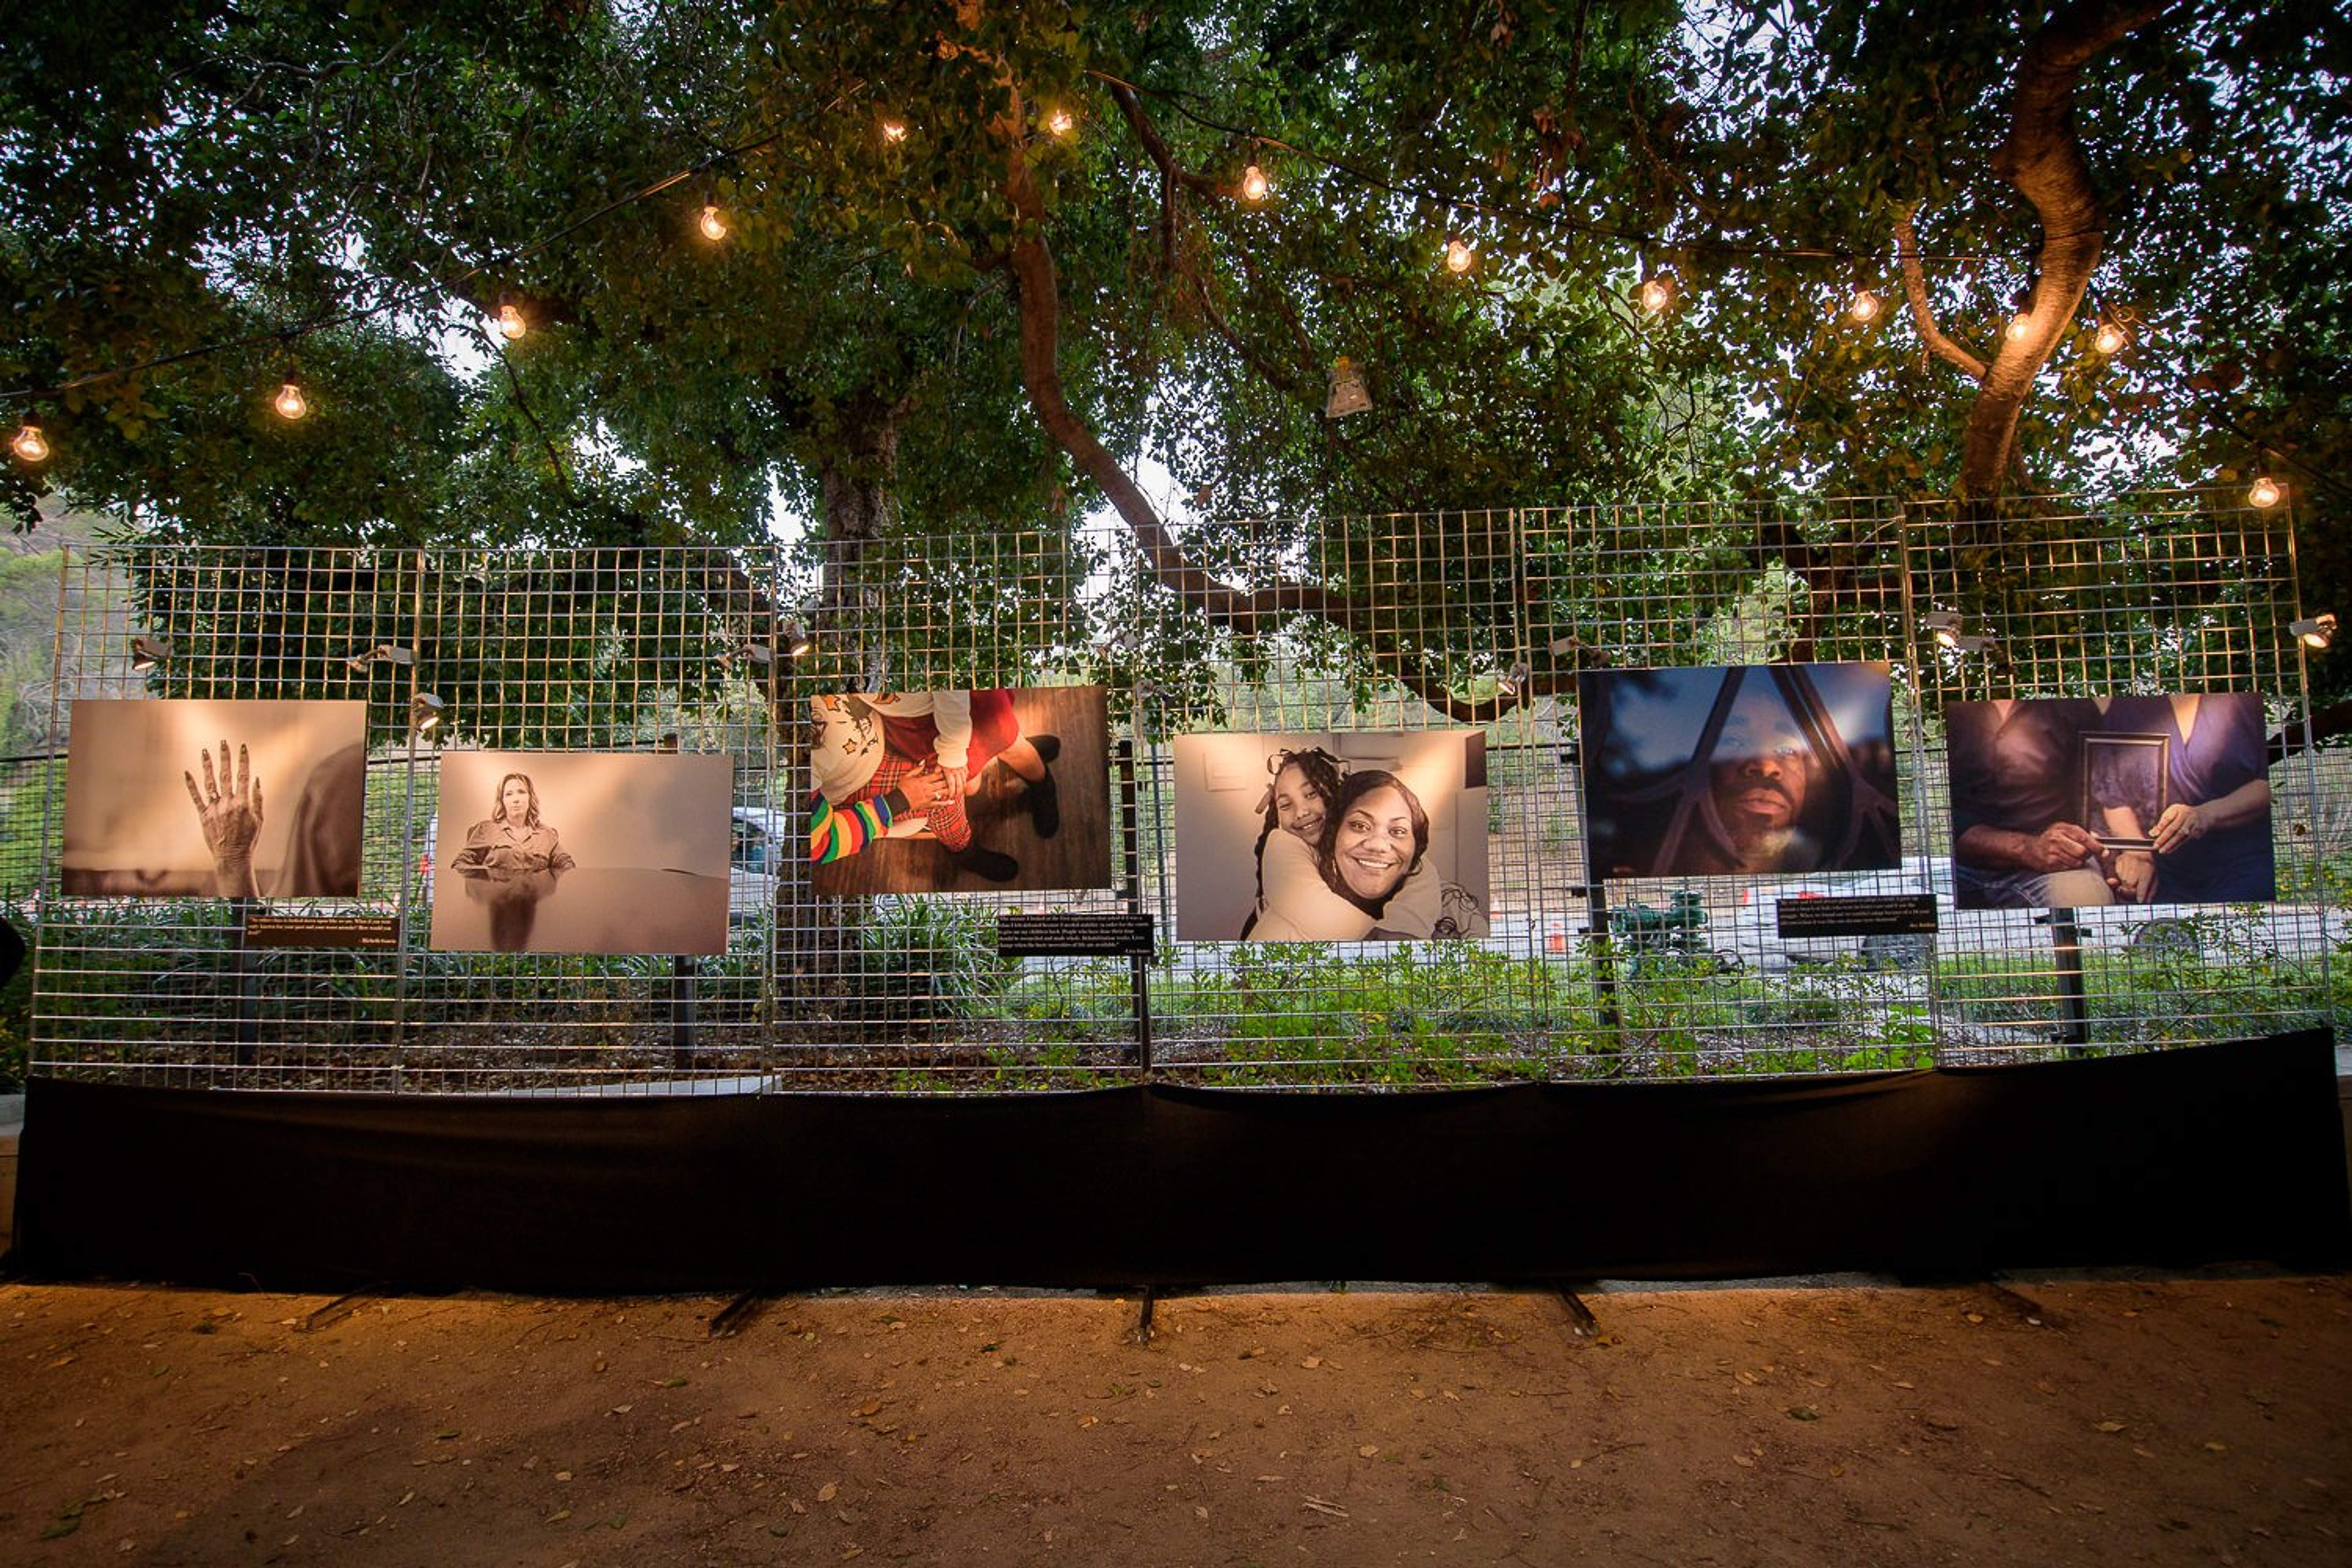 Photos of people affected by incarceration posted on a fence.